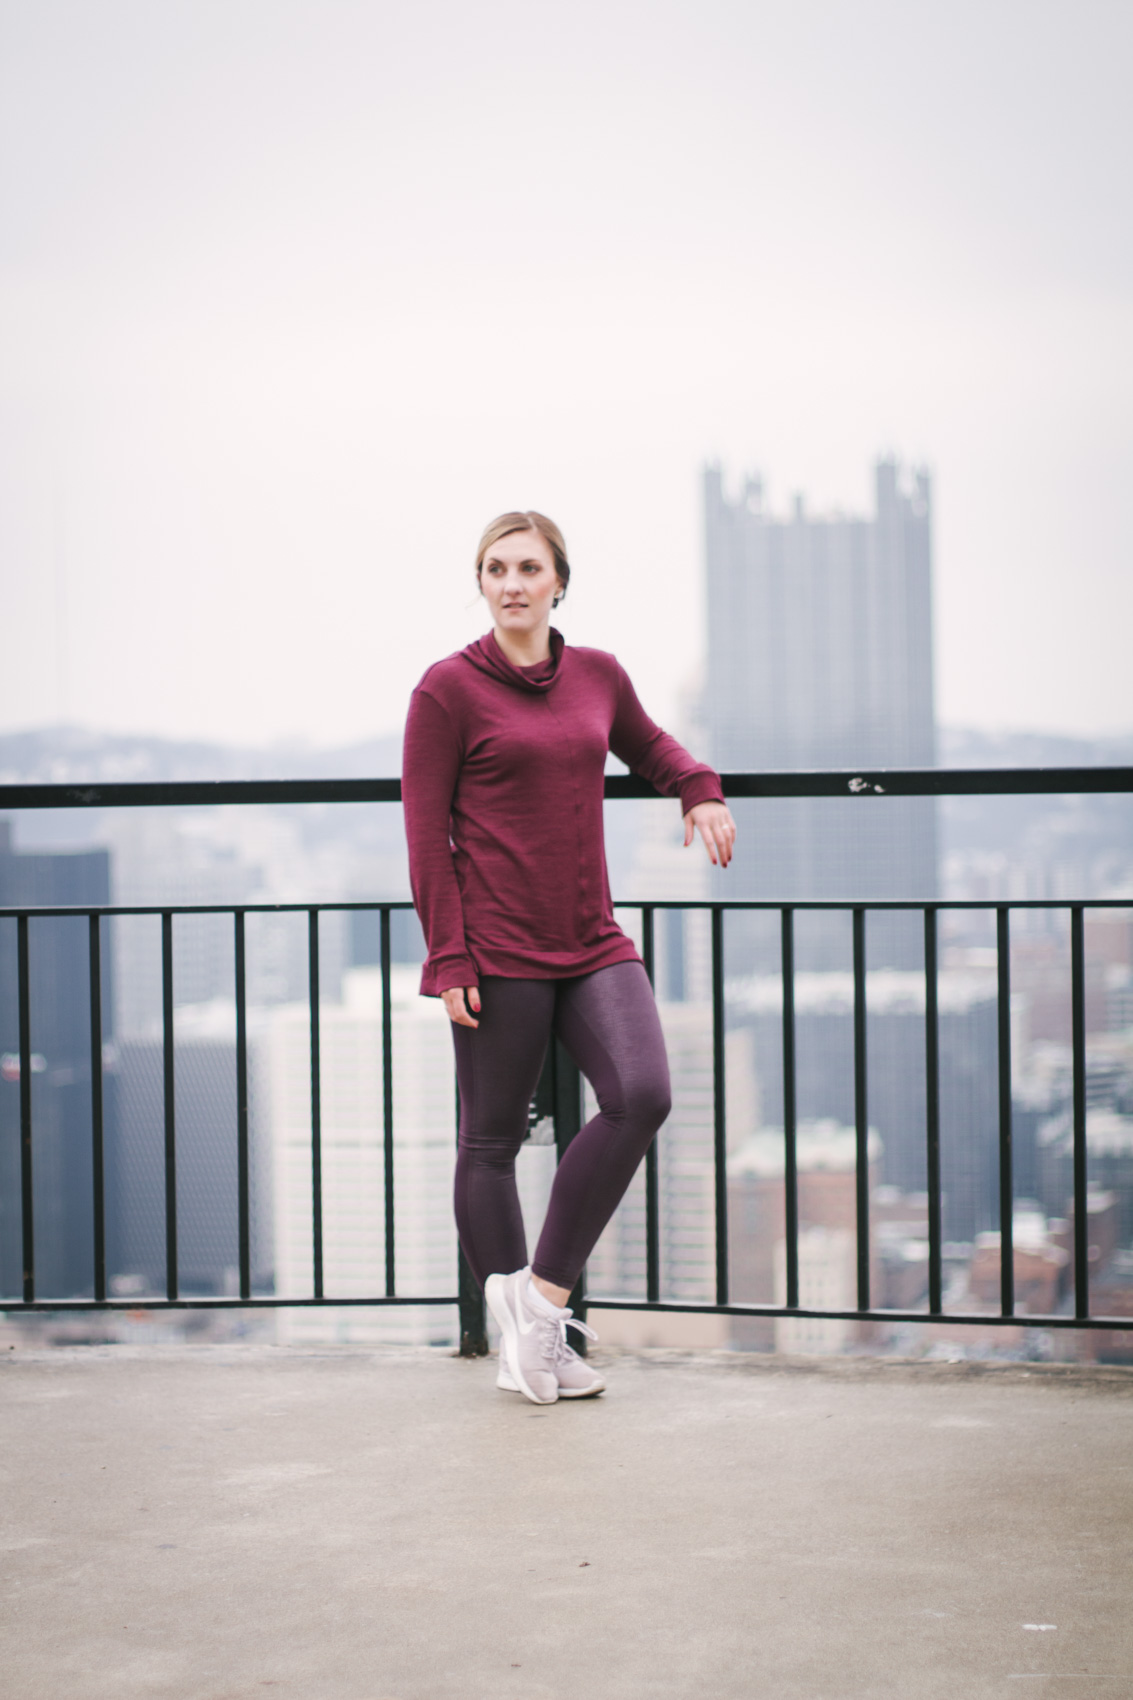 Worried about falling off track with your fitness & wellness goal setting this year? Here's how I reframed my 2019 resolutions to make them more realistic. Also, find out why I'm about to sign up for a Planet Fitness membership! 